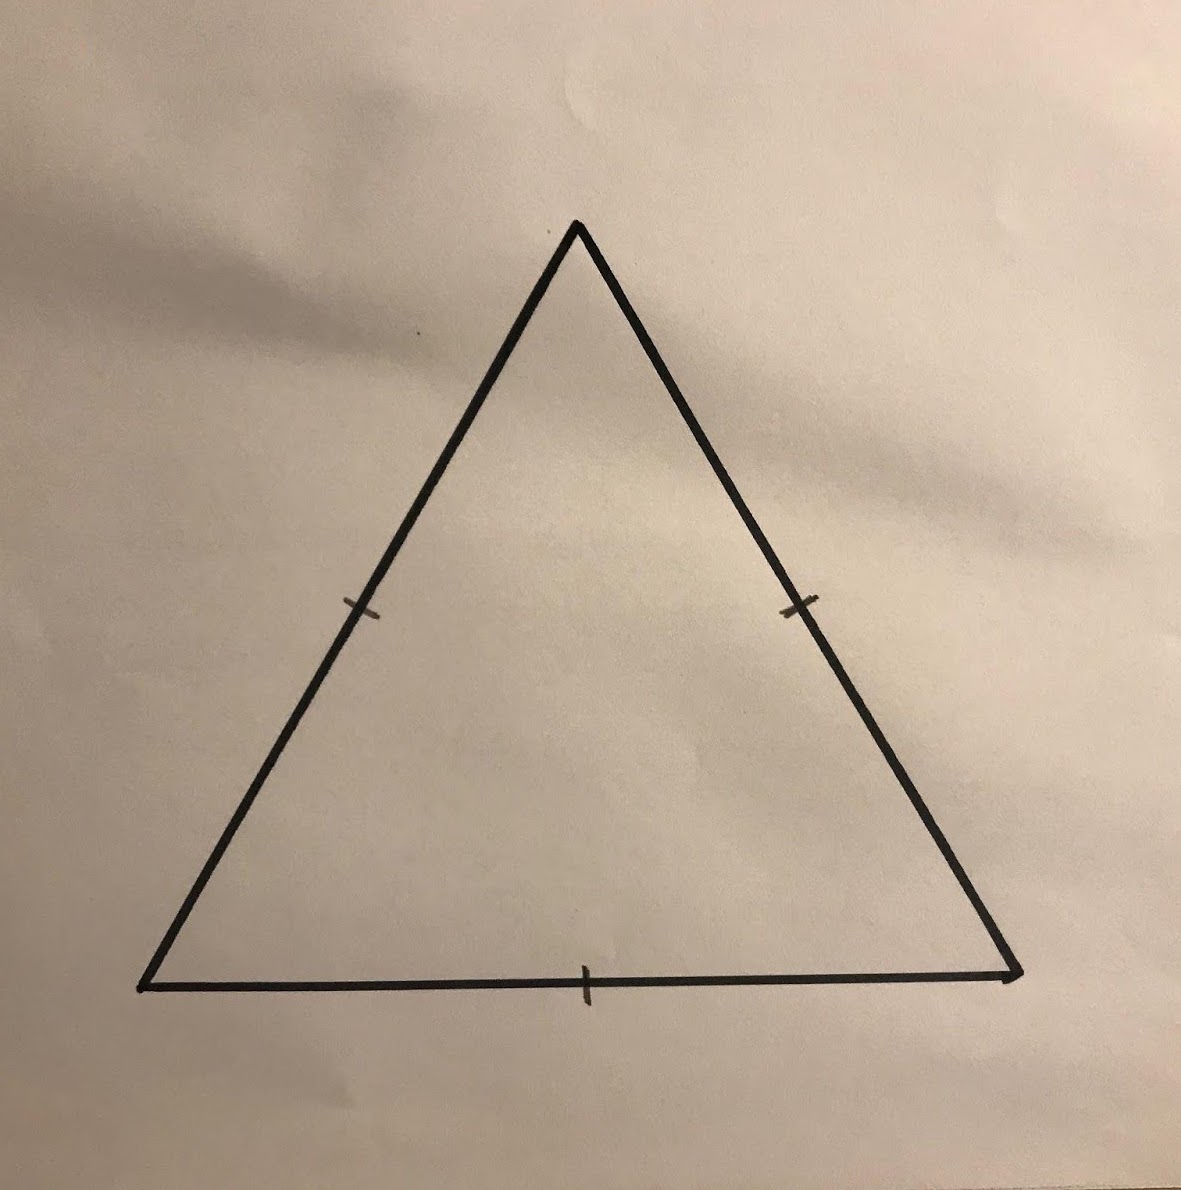 Outline sketch of an equilateral triangle with tick marks indicating the midpoint of each side.